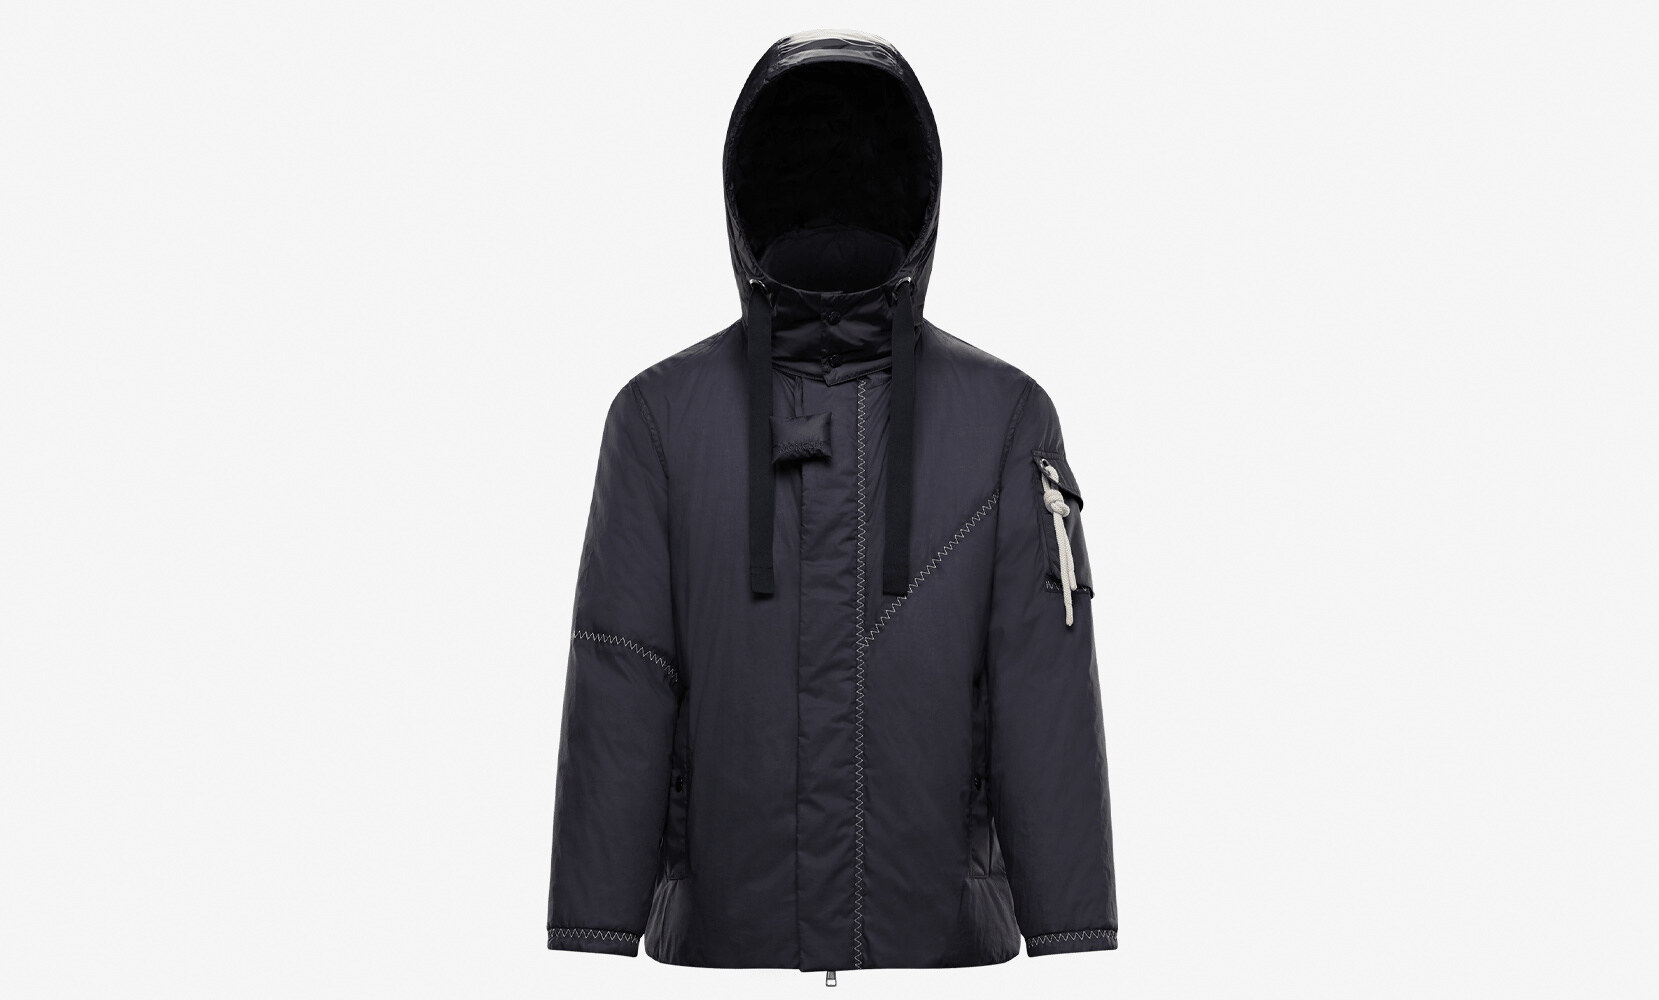 Moncler x JW Anderson capsule collection